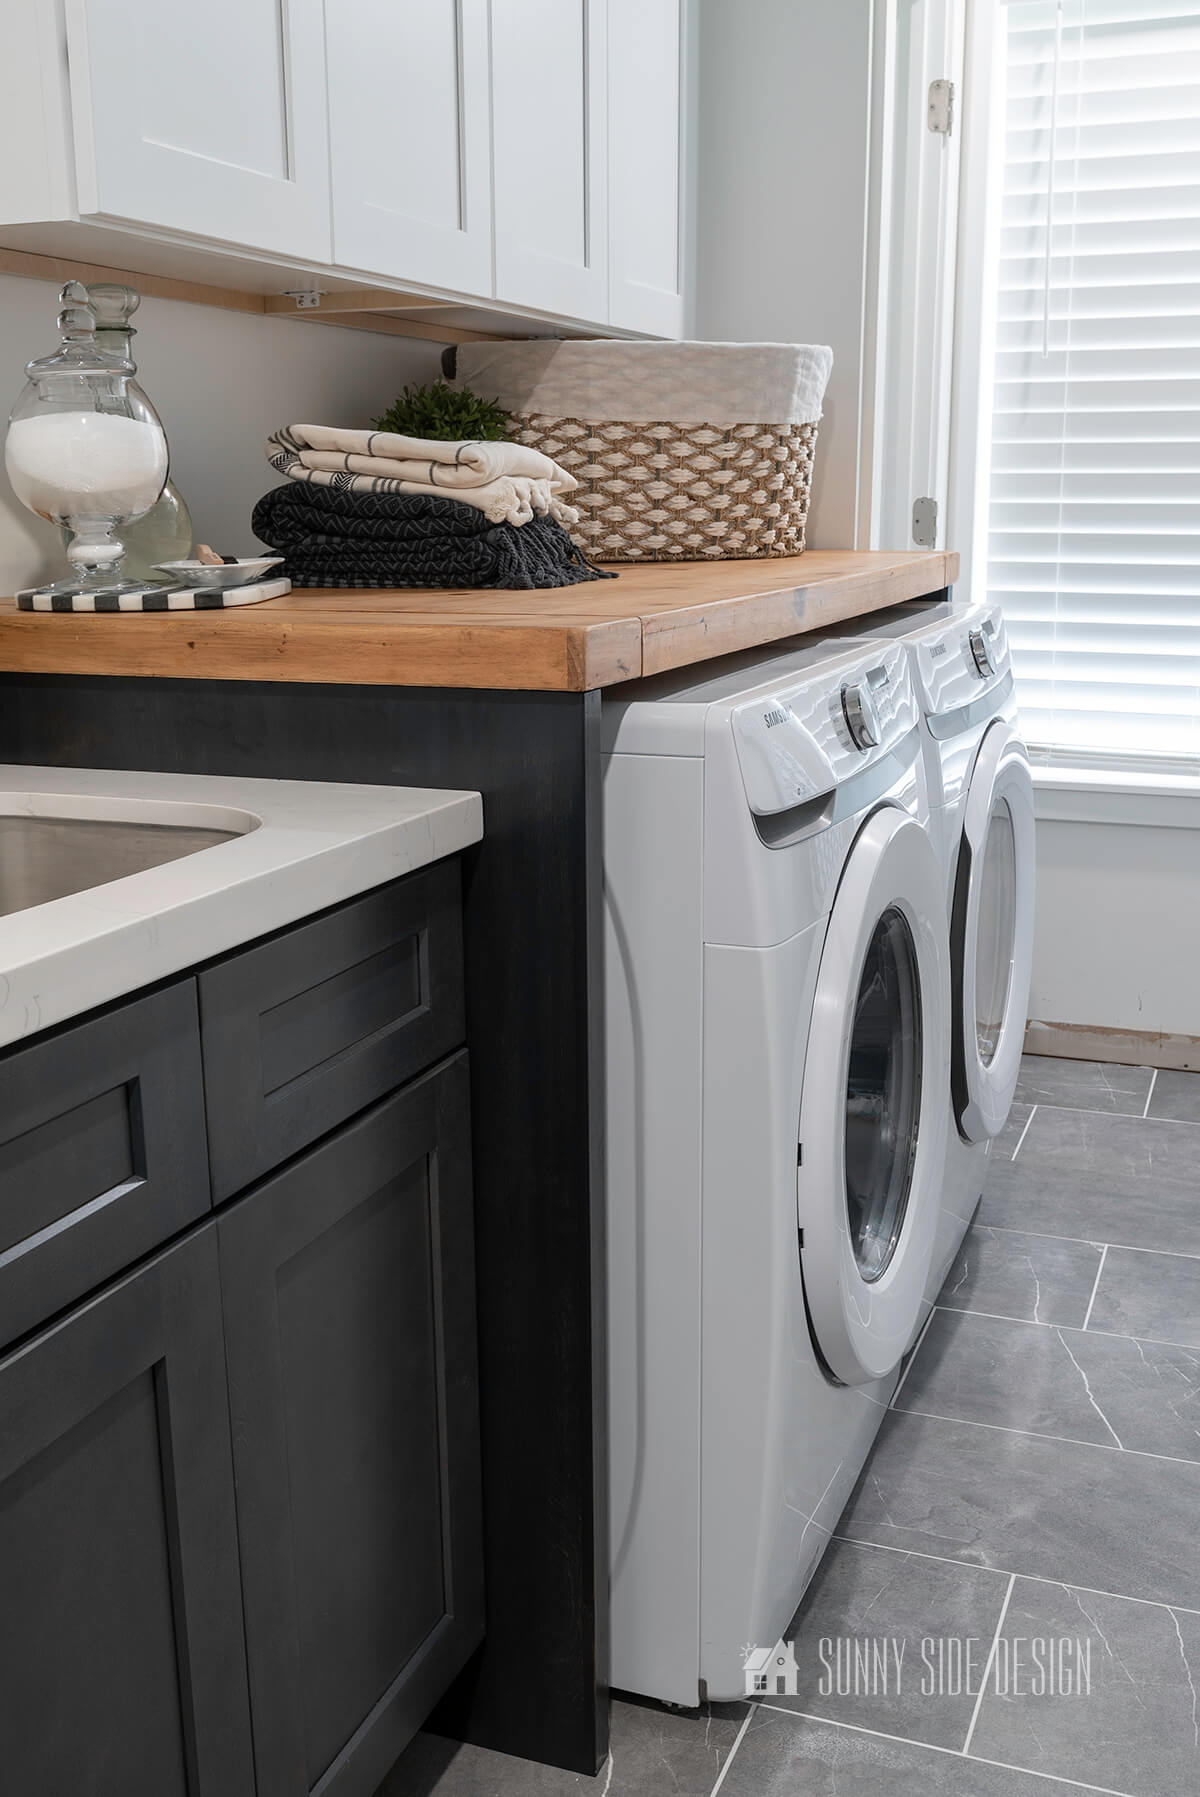 Laundry room with black and white cabinets, quartz countertop and stainless steel sink. White laundry appliances with a natural wood folding table over appliances. Topped with a jute laundry basket and folded towels.